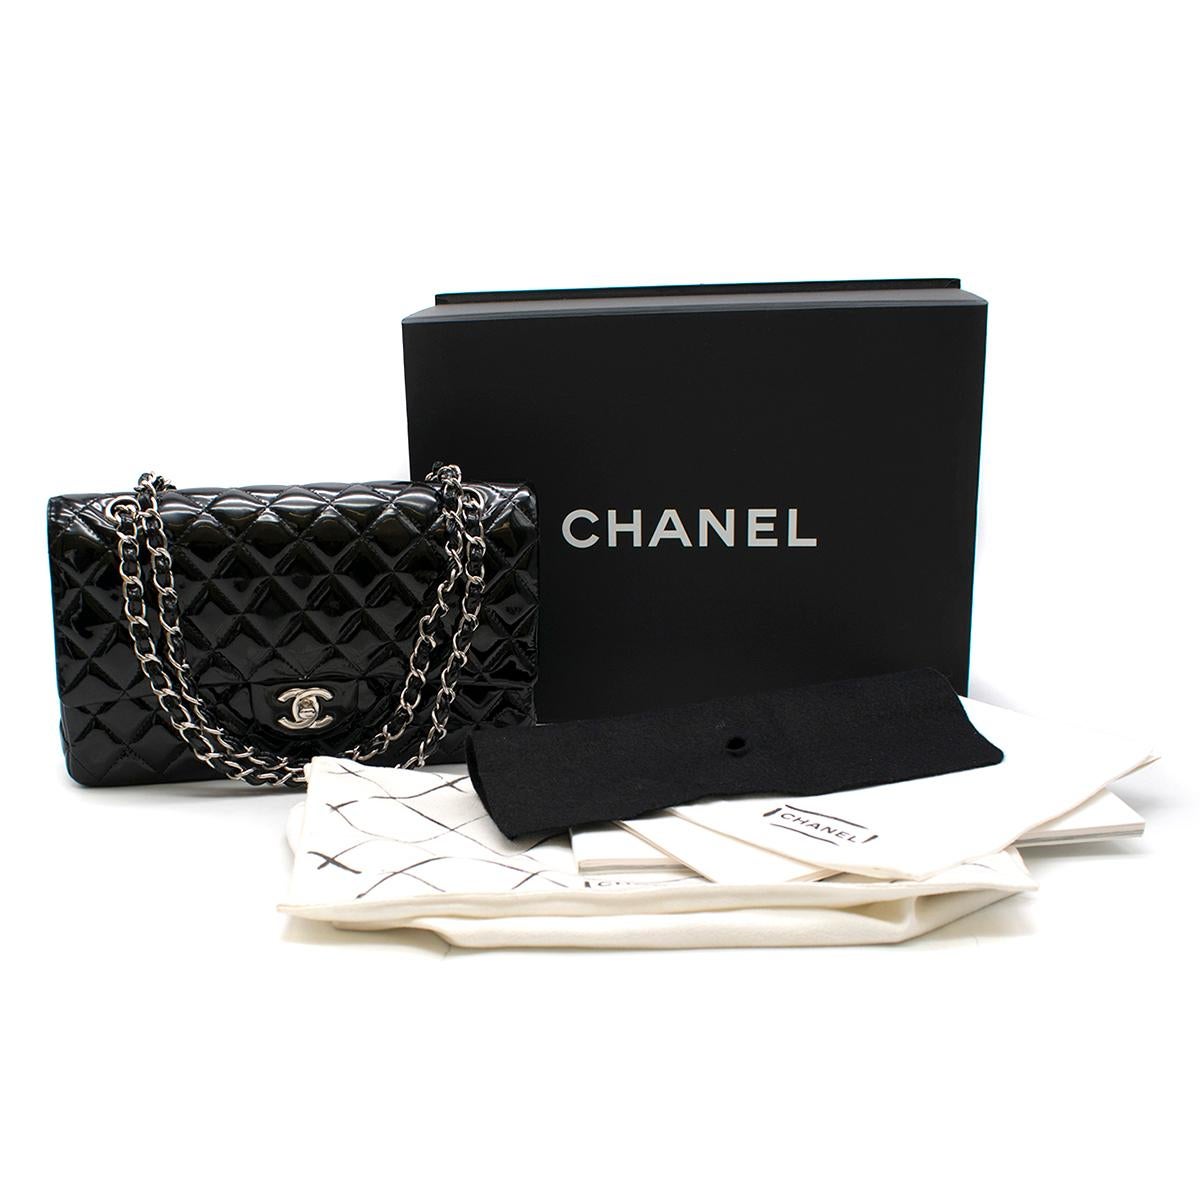 Chanel Black Patent Leather Double Flap Classic Handbag

- Black patent leather quilted classic handbag
- Silver-tone metal interlaced with leather chain
- Front signature CC clasp
- Double flap with zip fastening pocket
- Black leather lining with